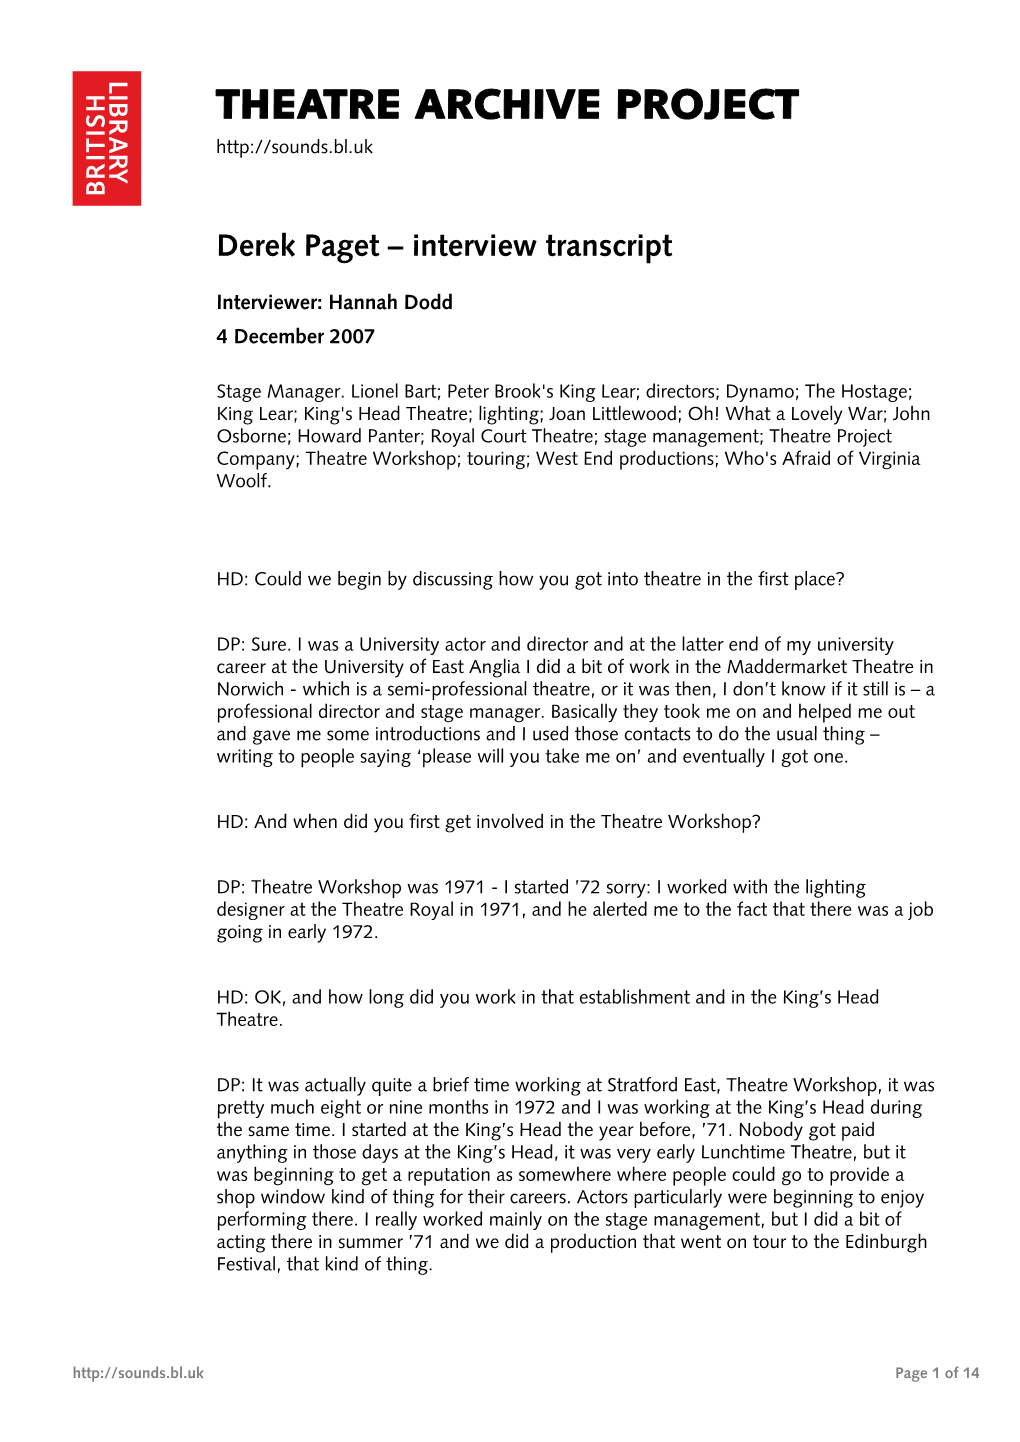 Theatre Archive Project: Interview with Derek Paget